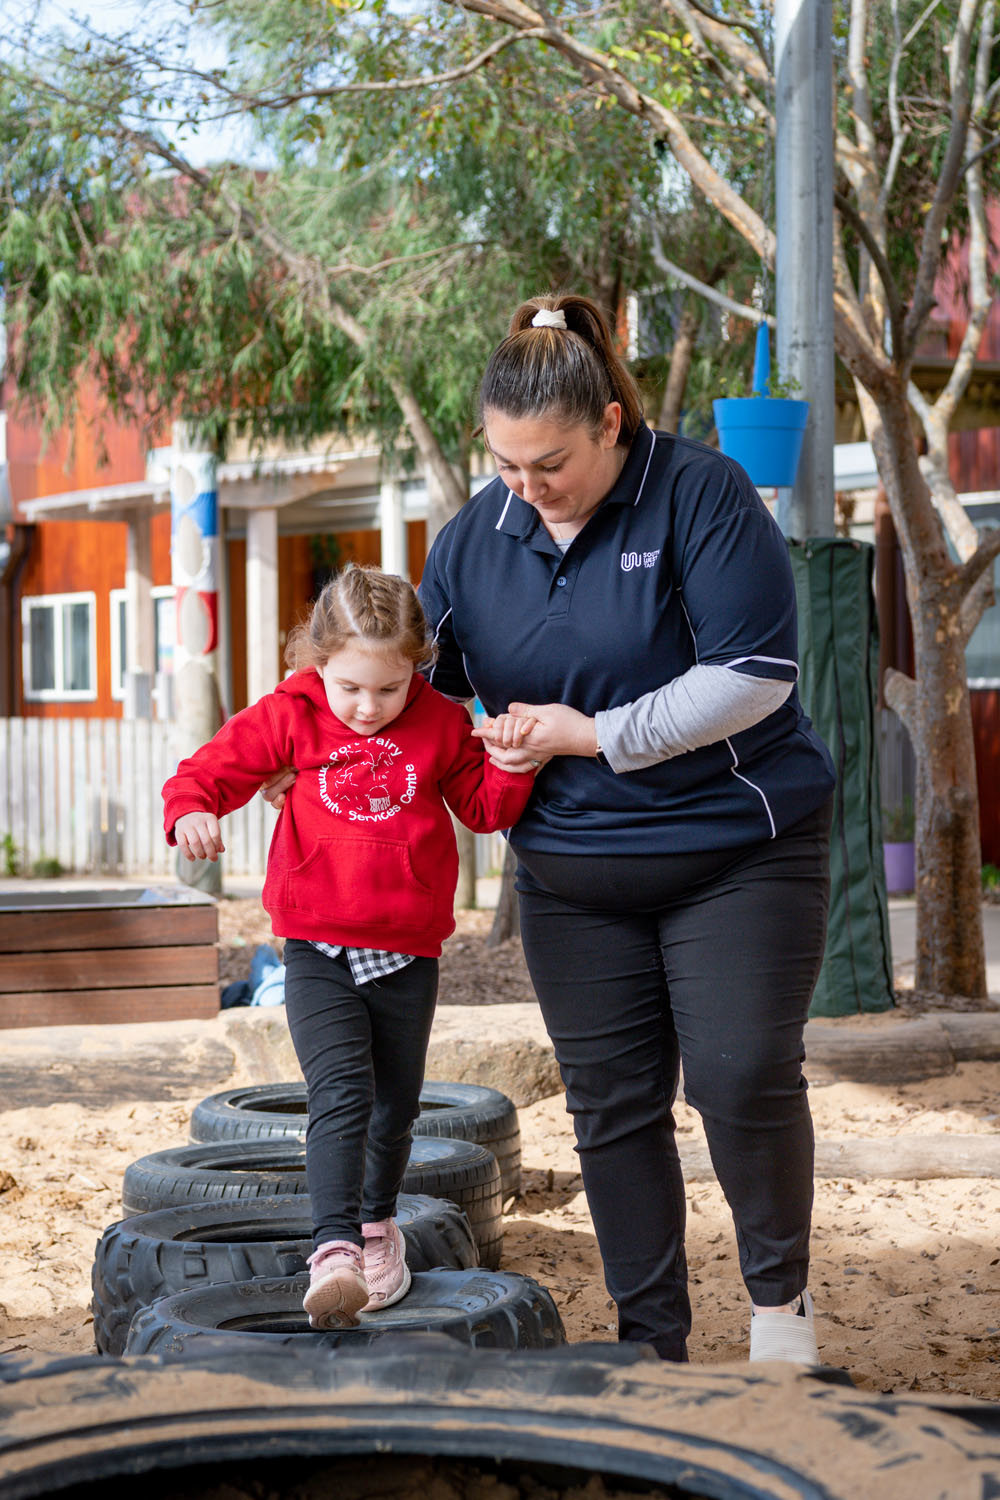 the Certificate III Early Childhood Education and Care at South West TAFE